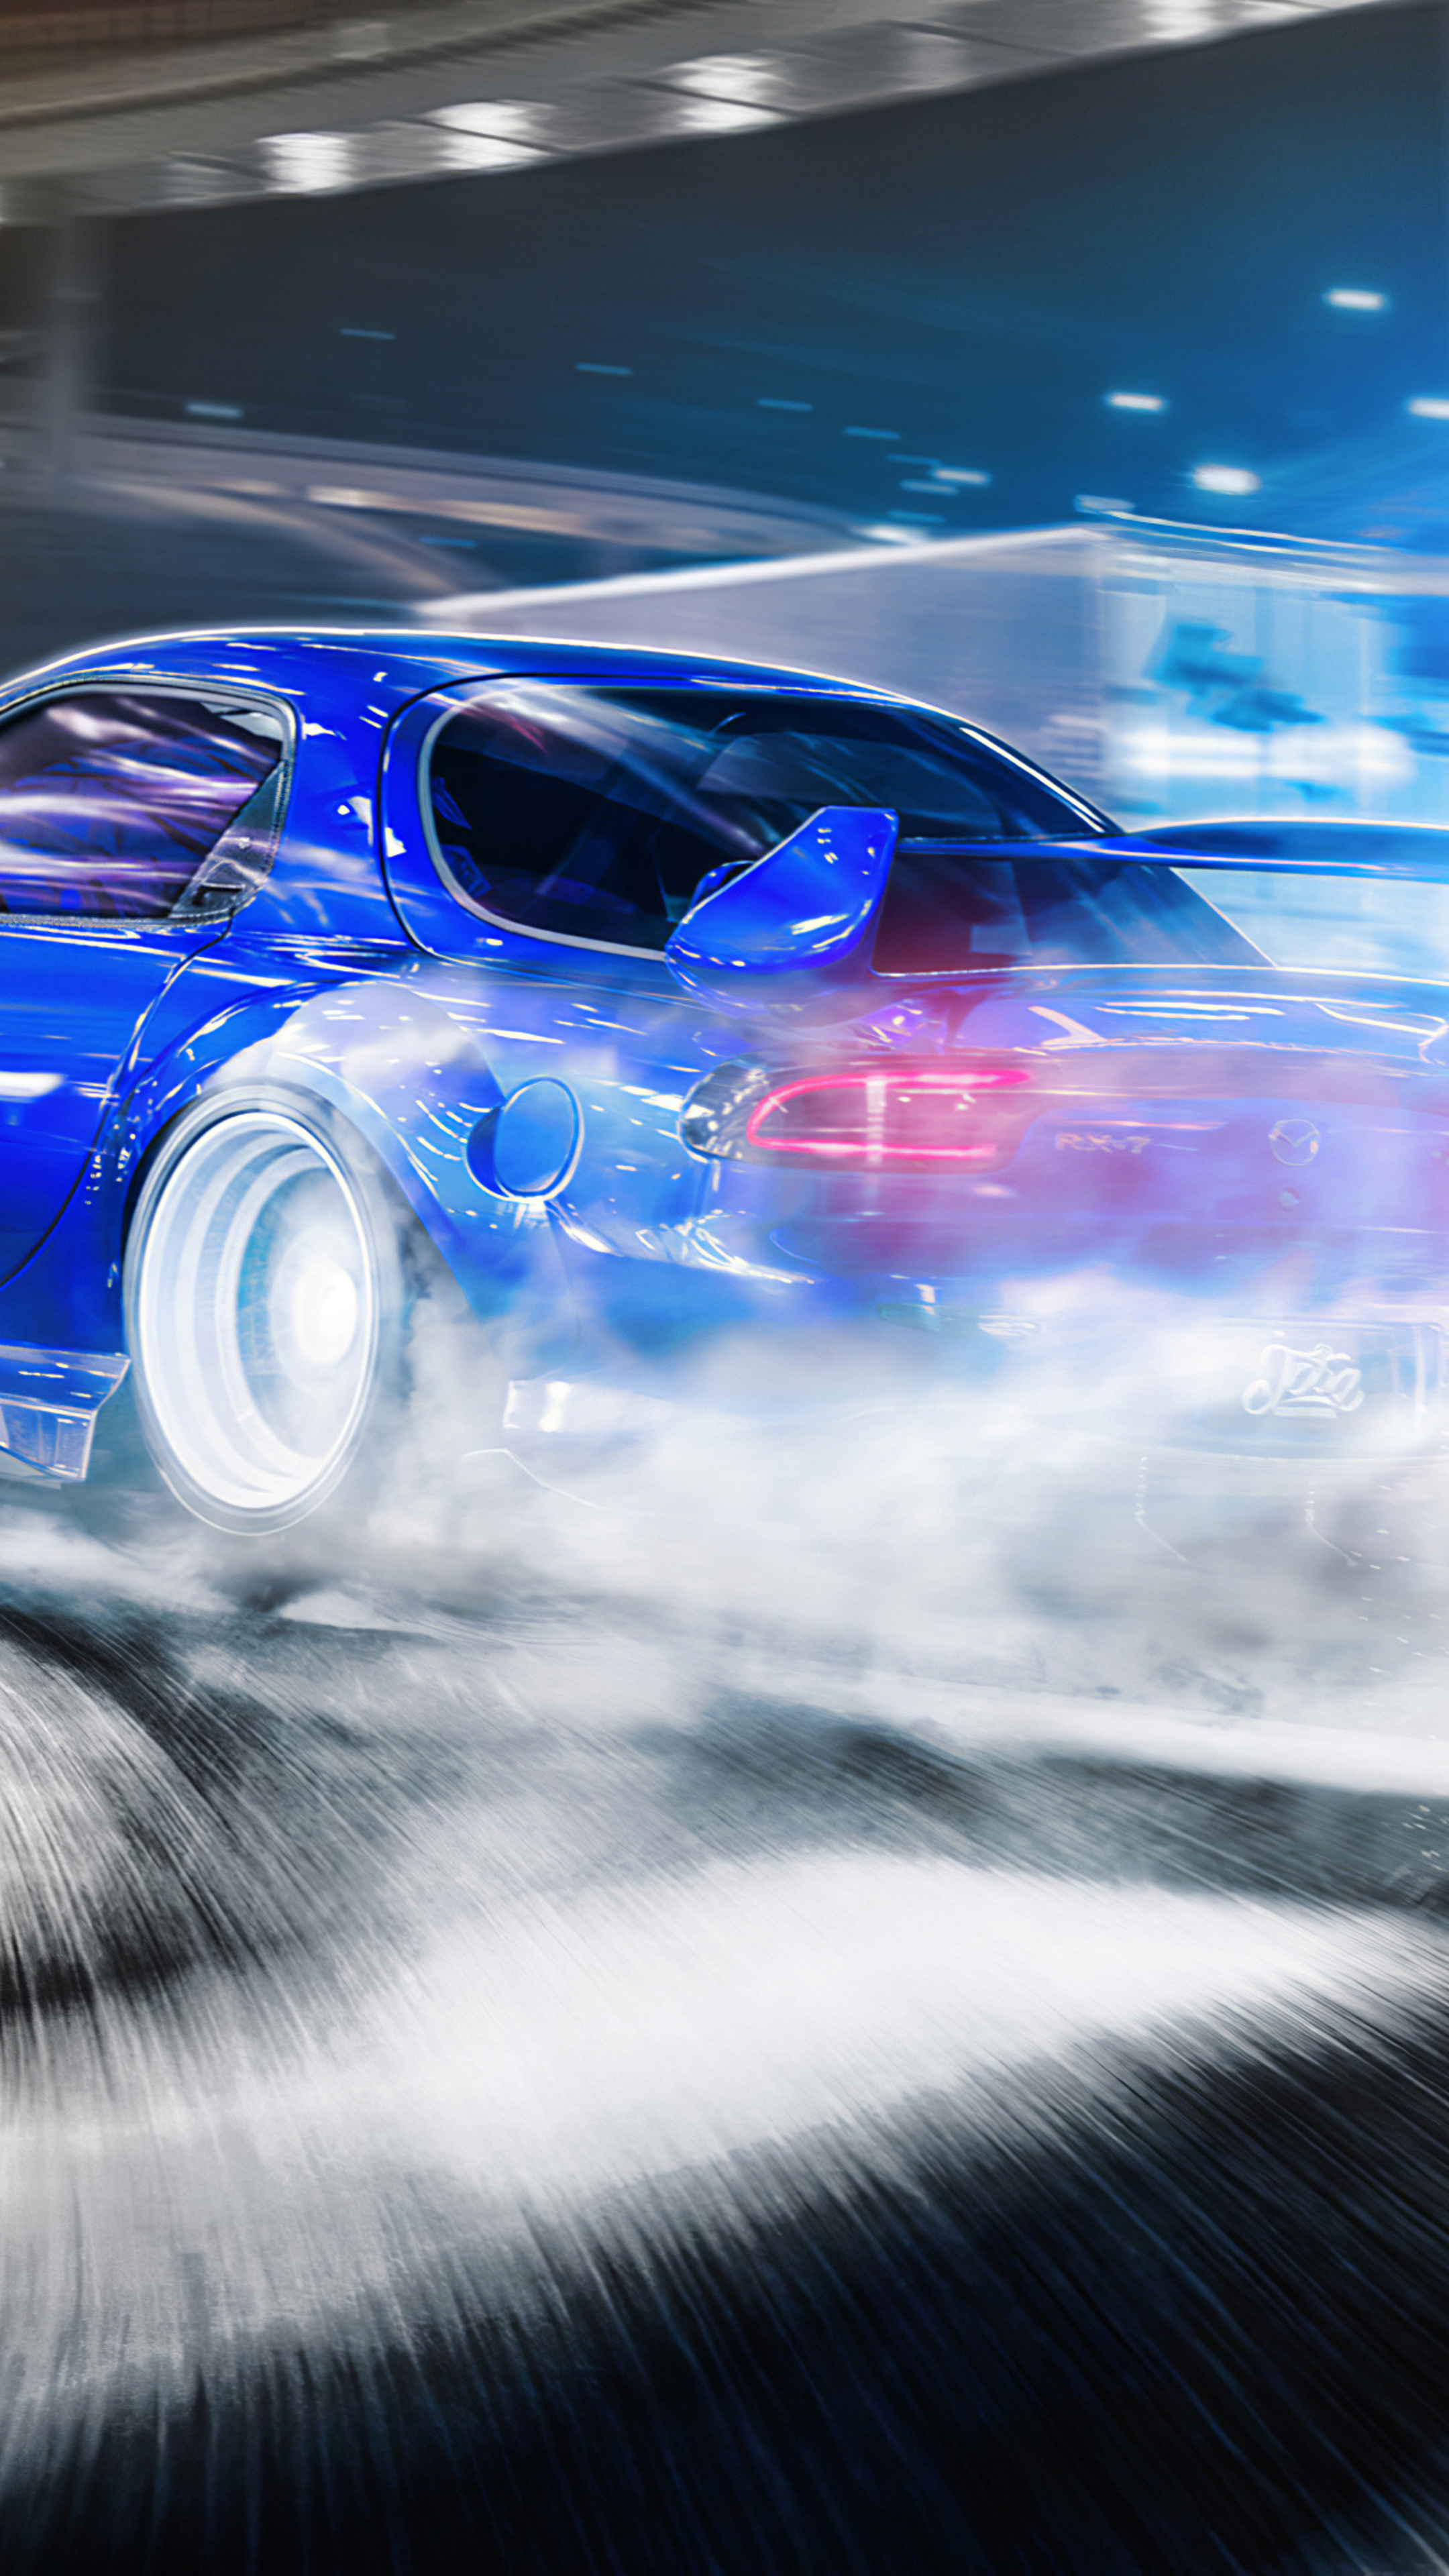 Drifting: Blue Mazda RX-7, A front-engine, rear-wheel-drive, rotary engine-powered sports car. 2160x3840 4K Wallpaper.